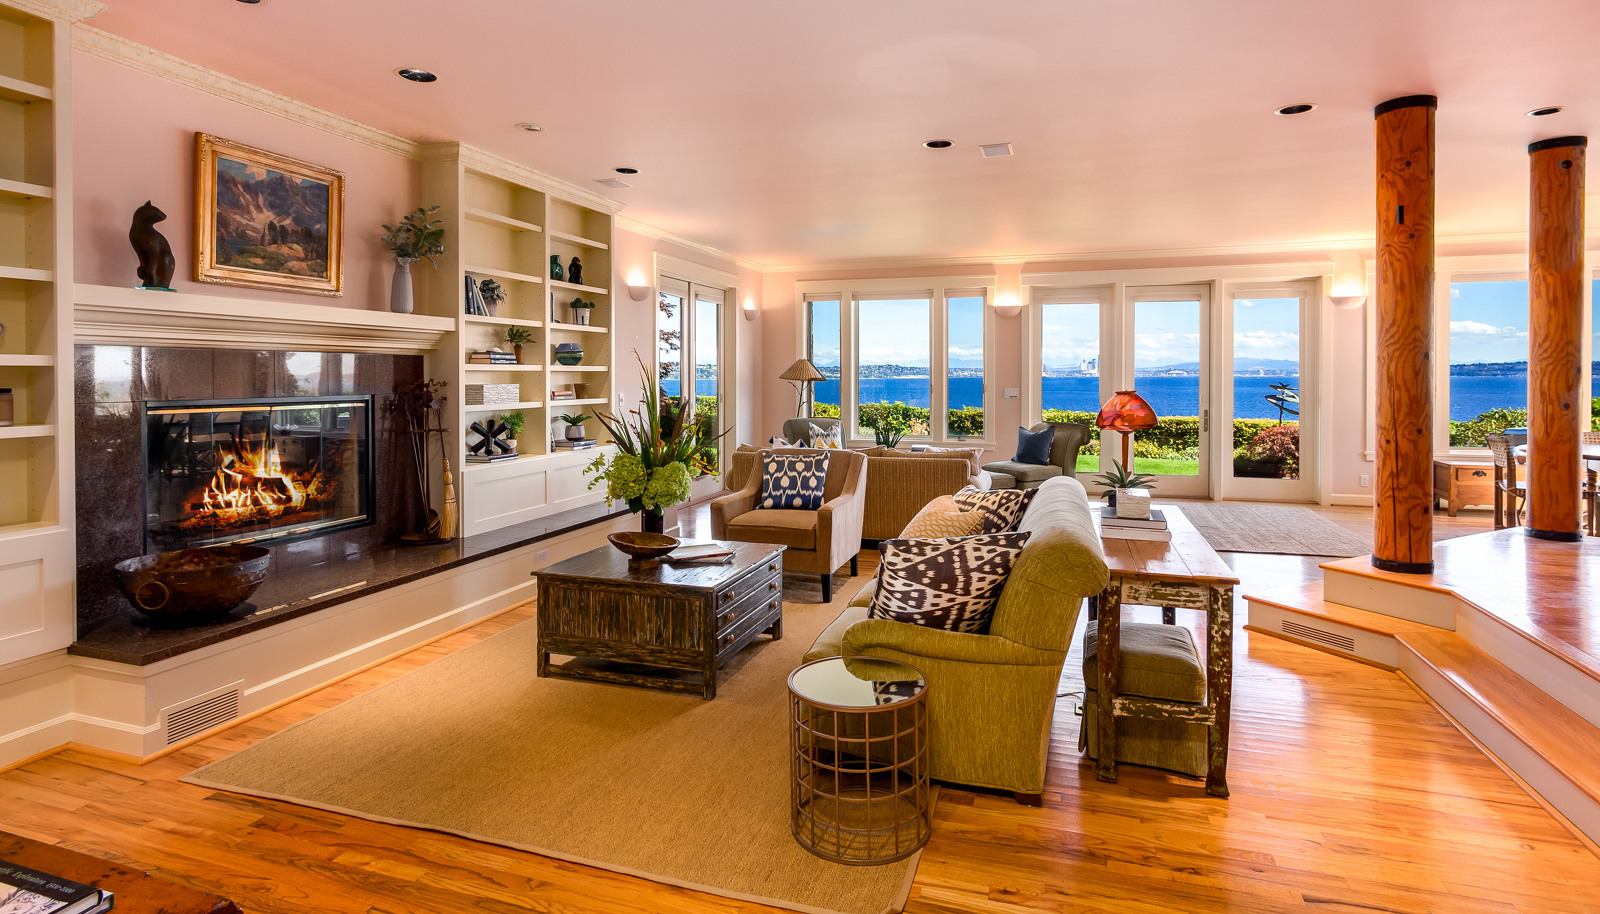 The water views greet you upon entry. Hardwood floors throughout the home!